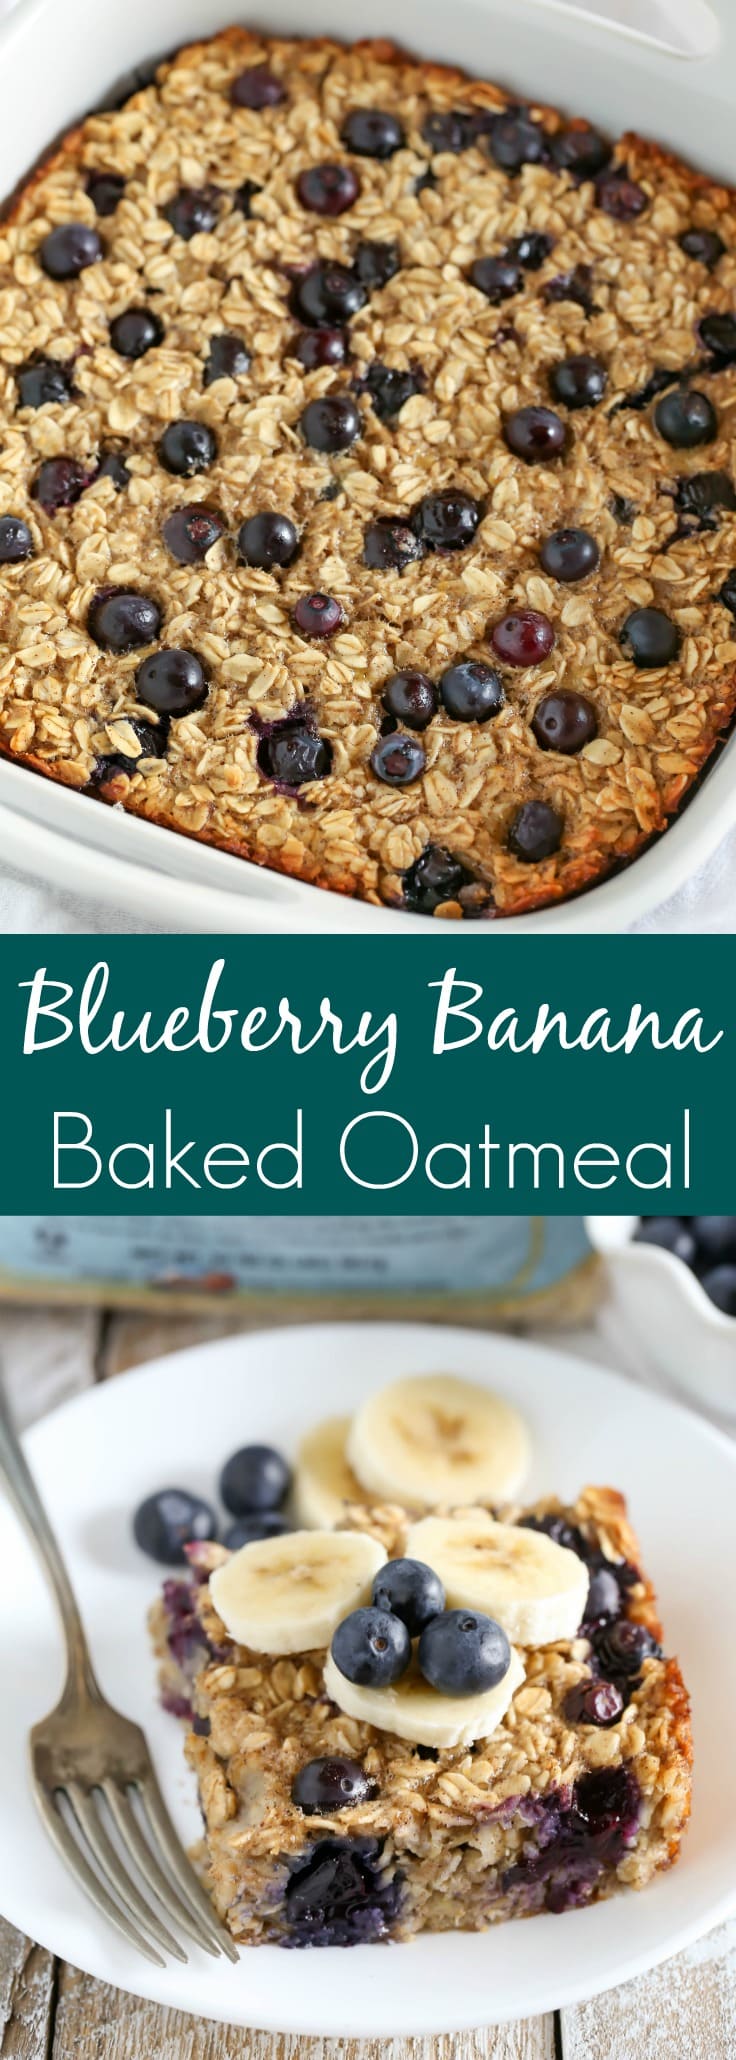 This Blueberry Banana Baked Oatmeal is easy to make and perfect for a quick, healthy breakfast or snack throughout the week!